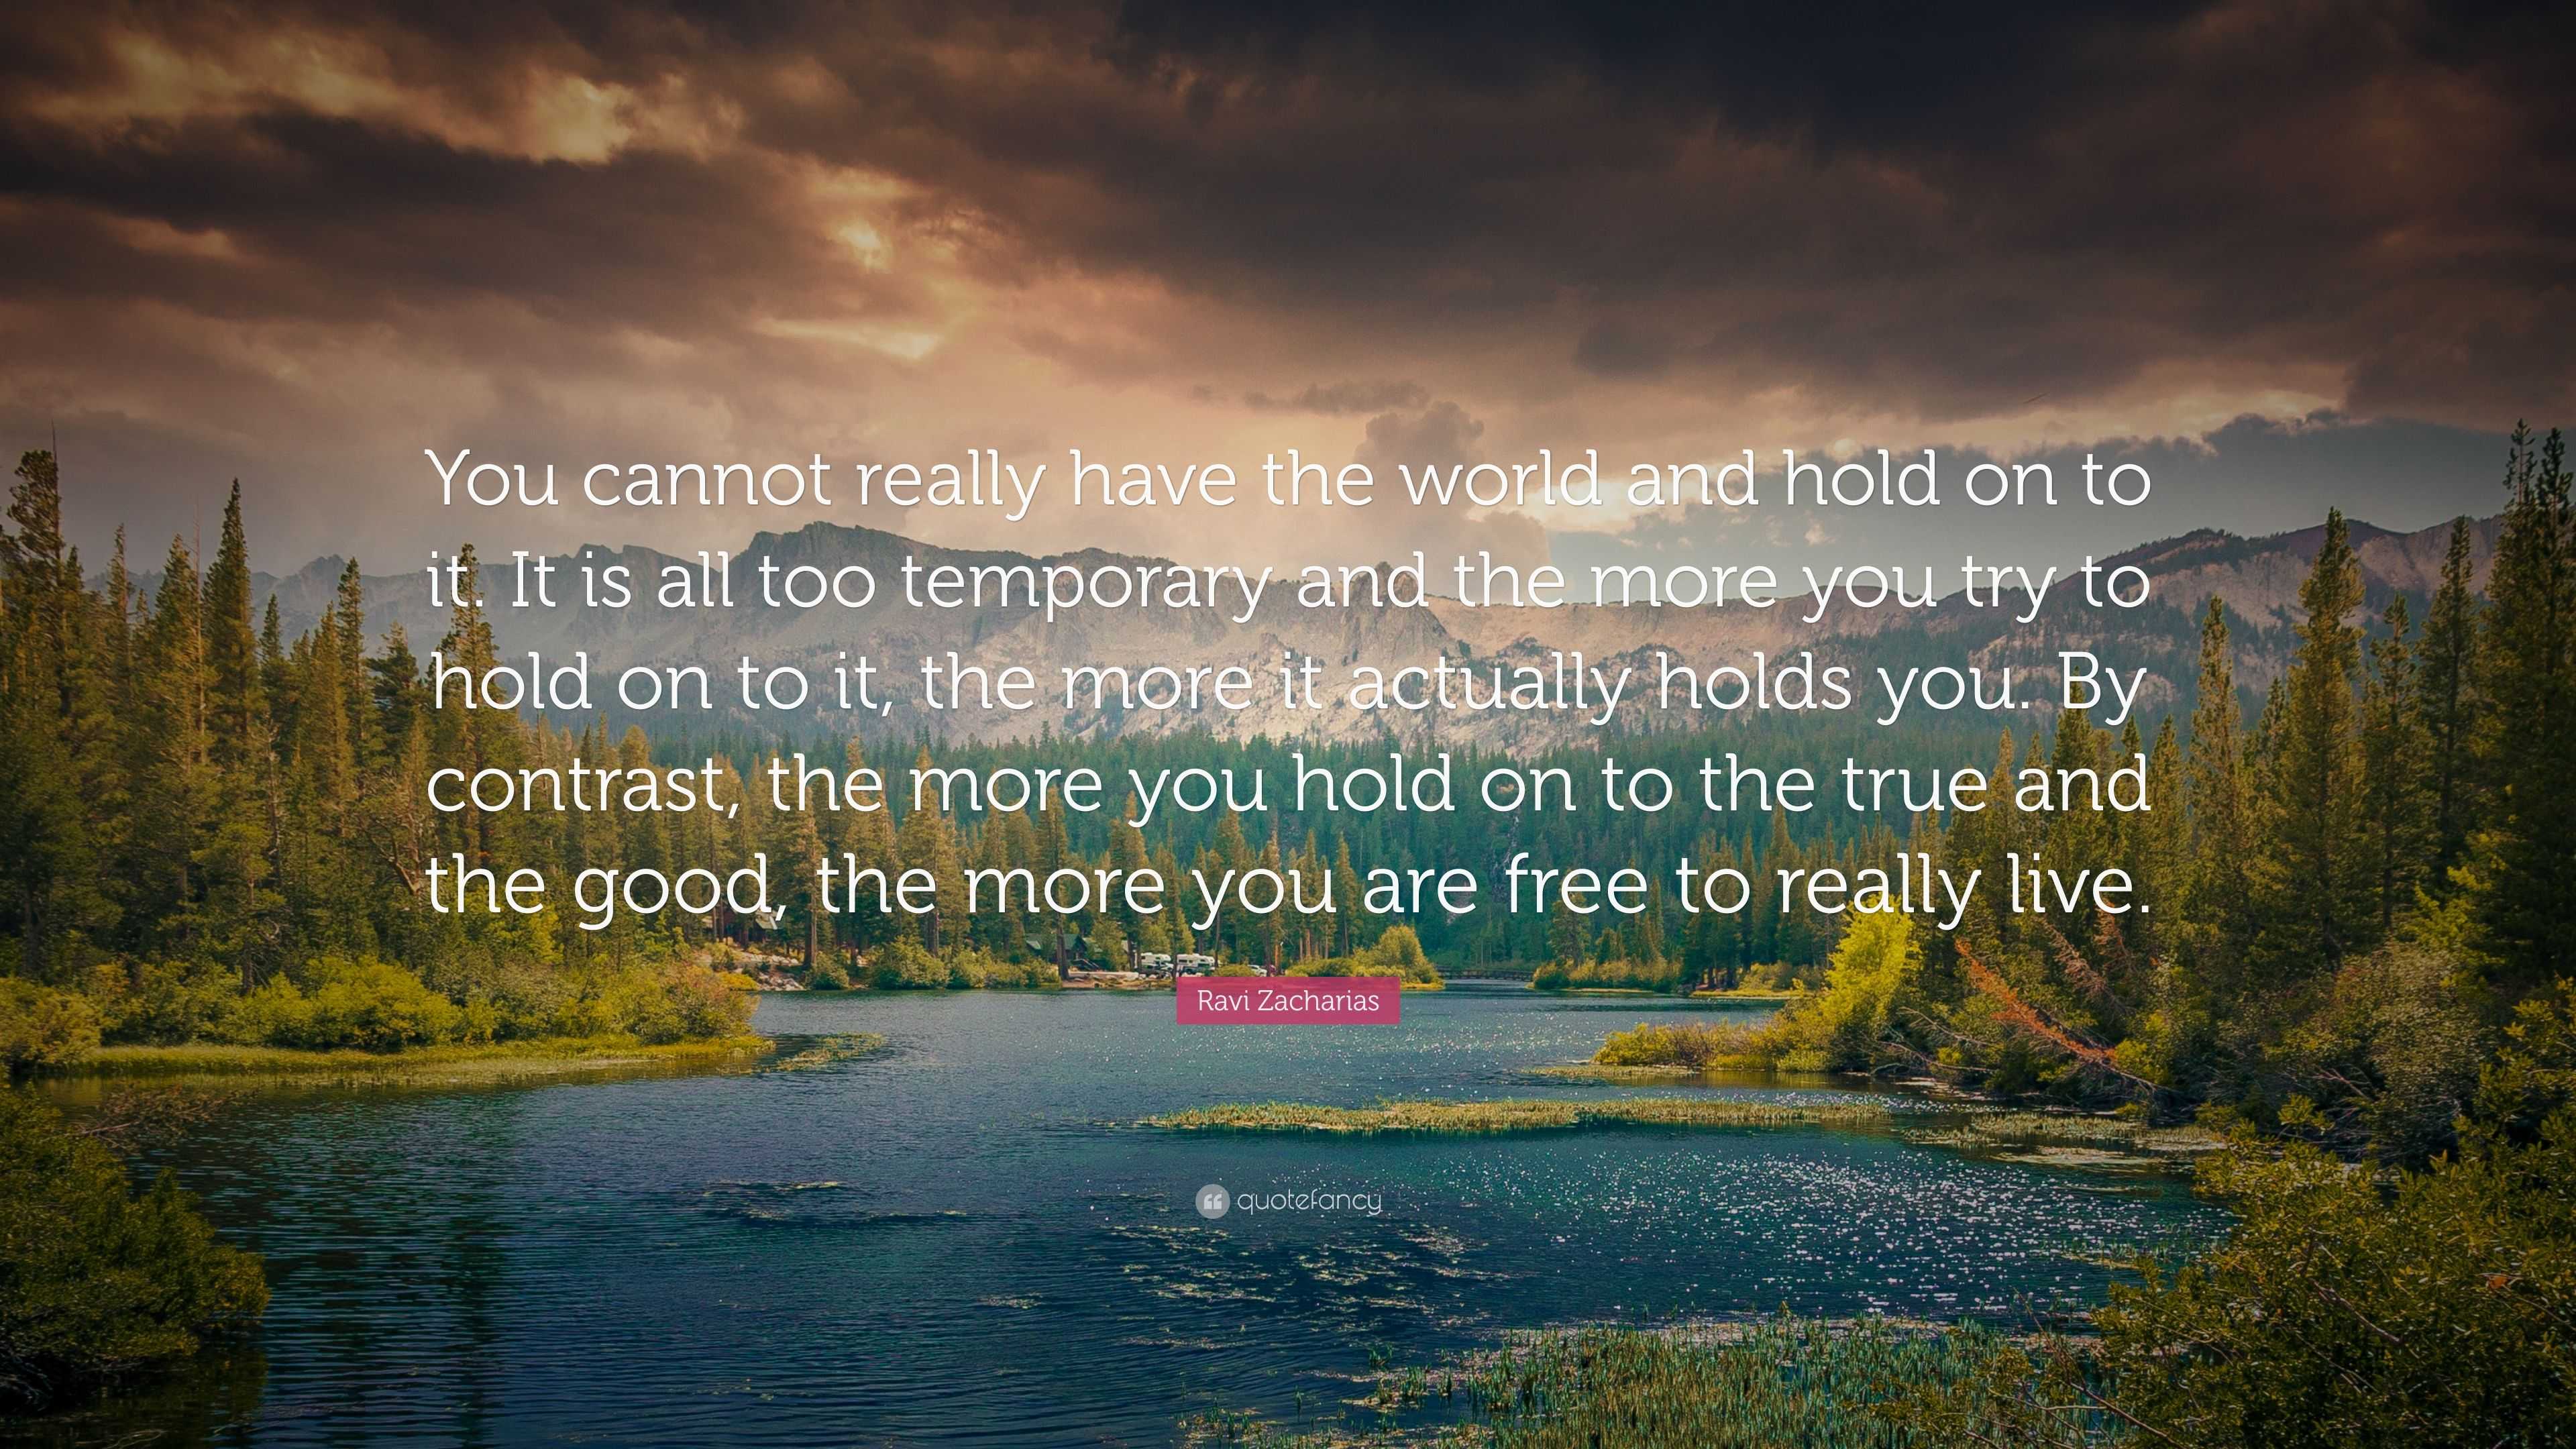 Ravi Zacharias Quote: “You cannot really have the world and hold on to ...